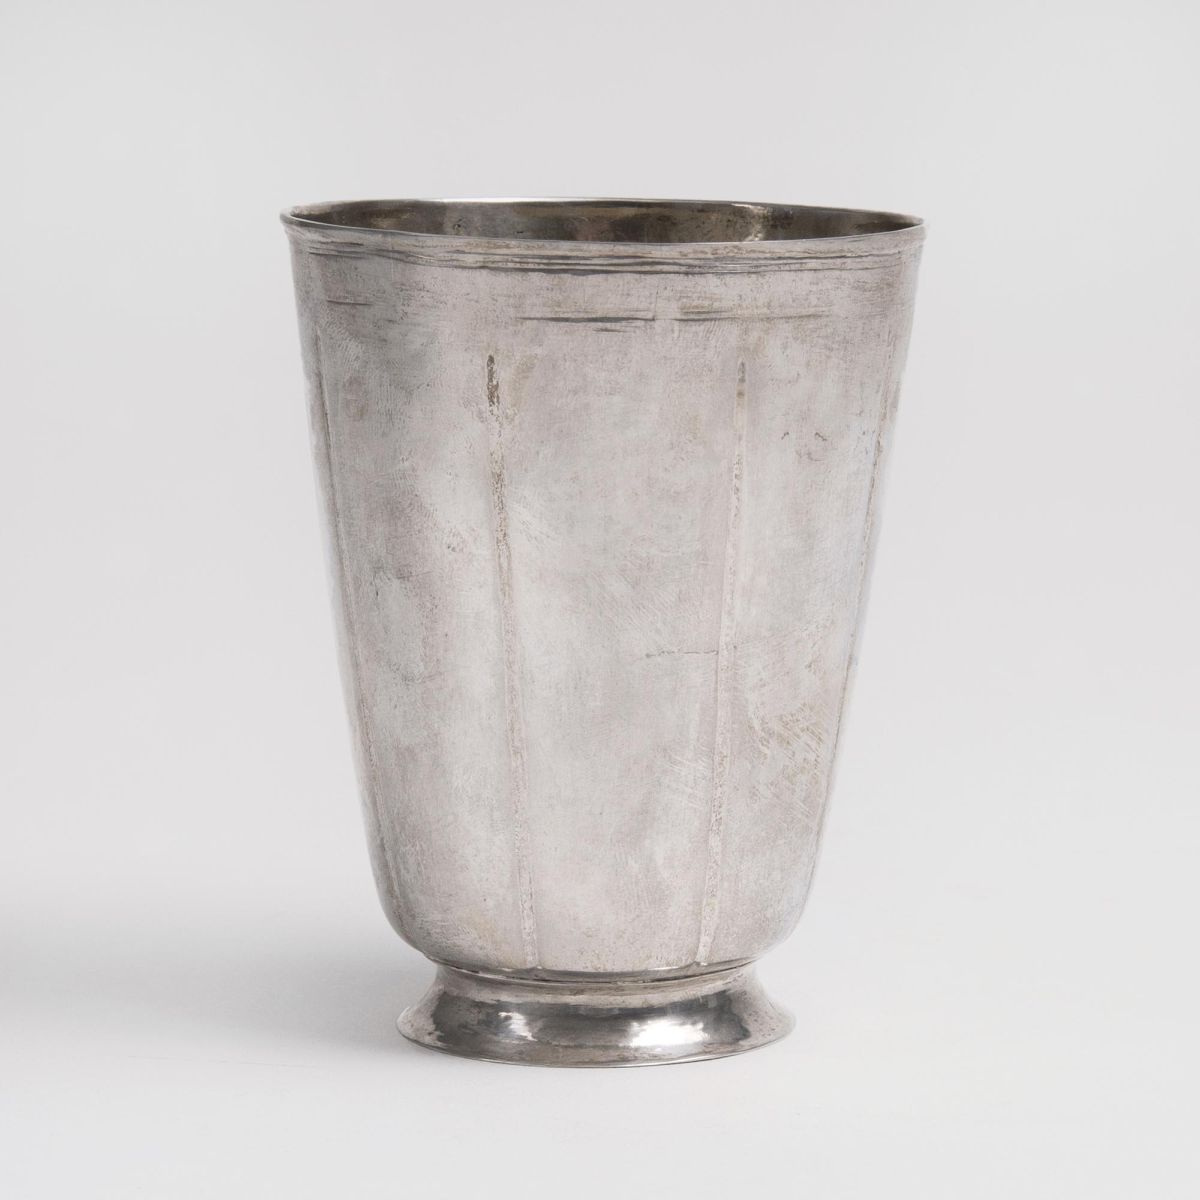 A Prussian Coin Cup